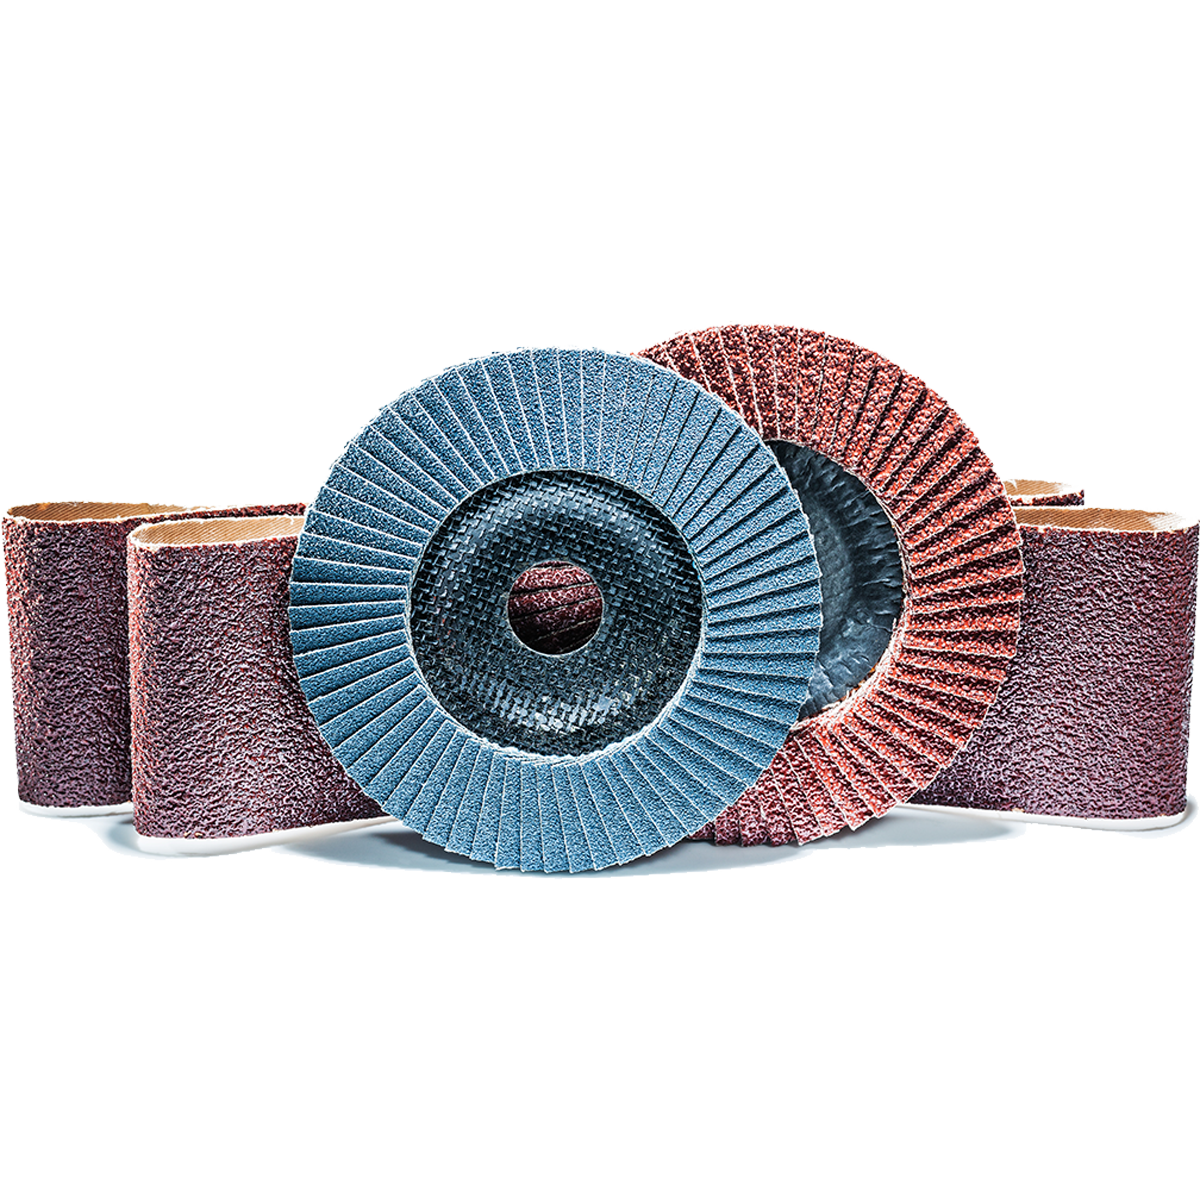 A comprehensive range abrasives, from sanding discs, cutting discs, to polishing wheels and sanding belts.